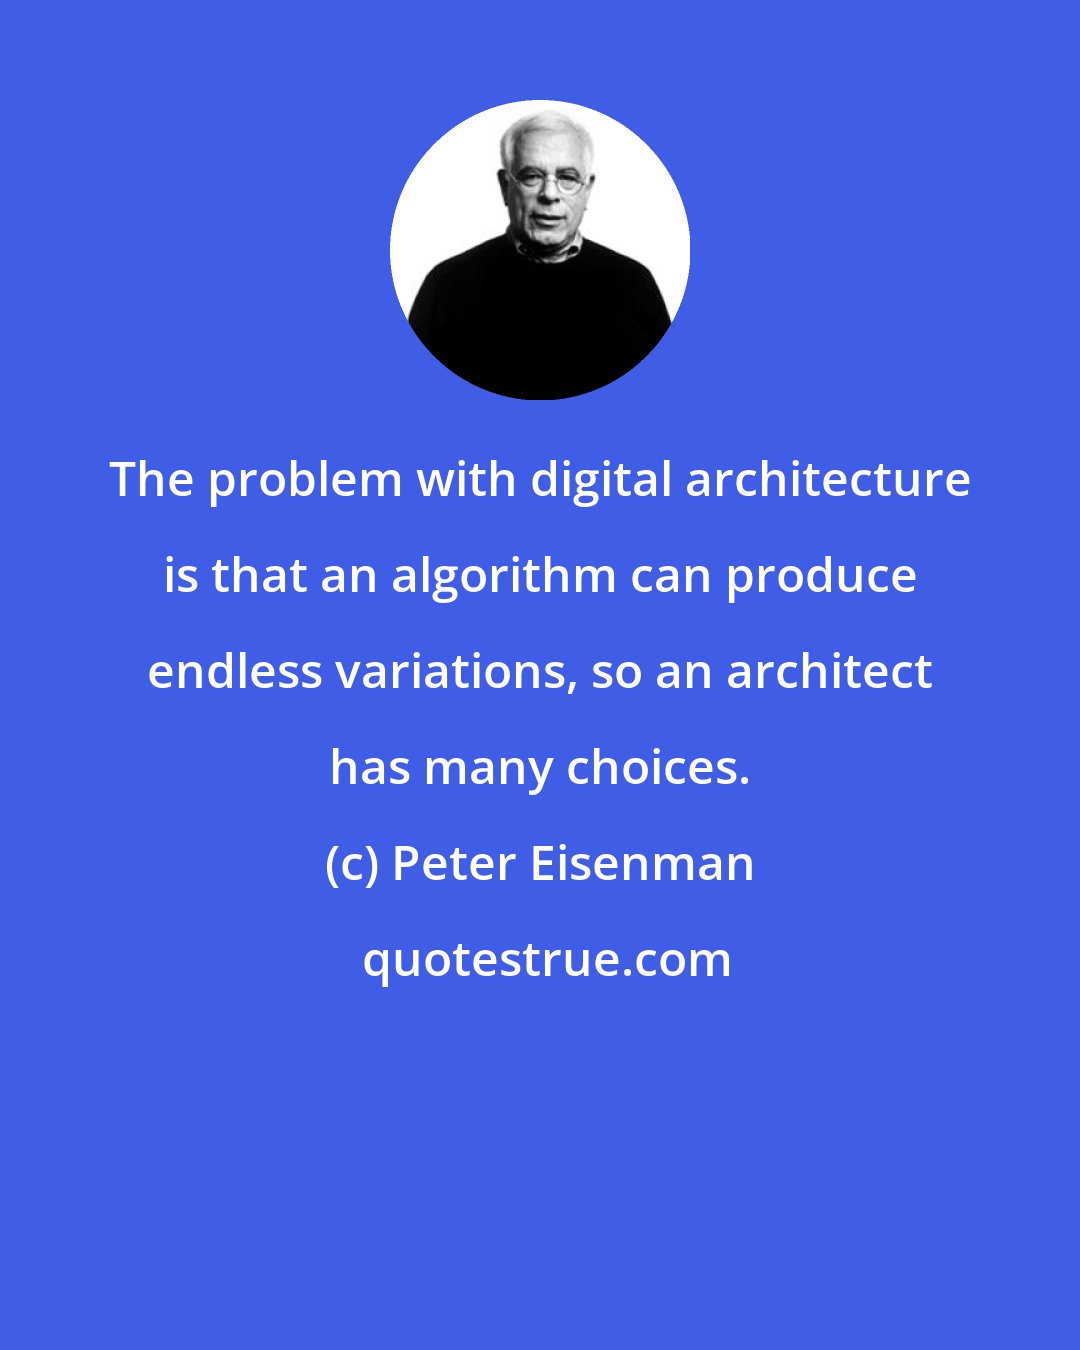 Peter Eisenman: The problem with digital architecture is that an algorithm can produce endless variations, so an architect has many choices.